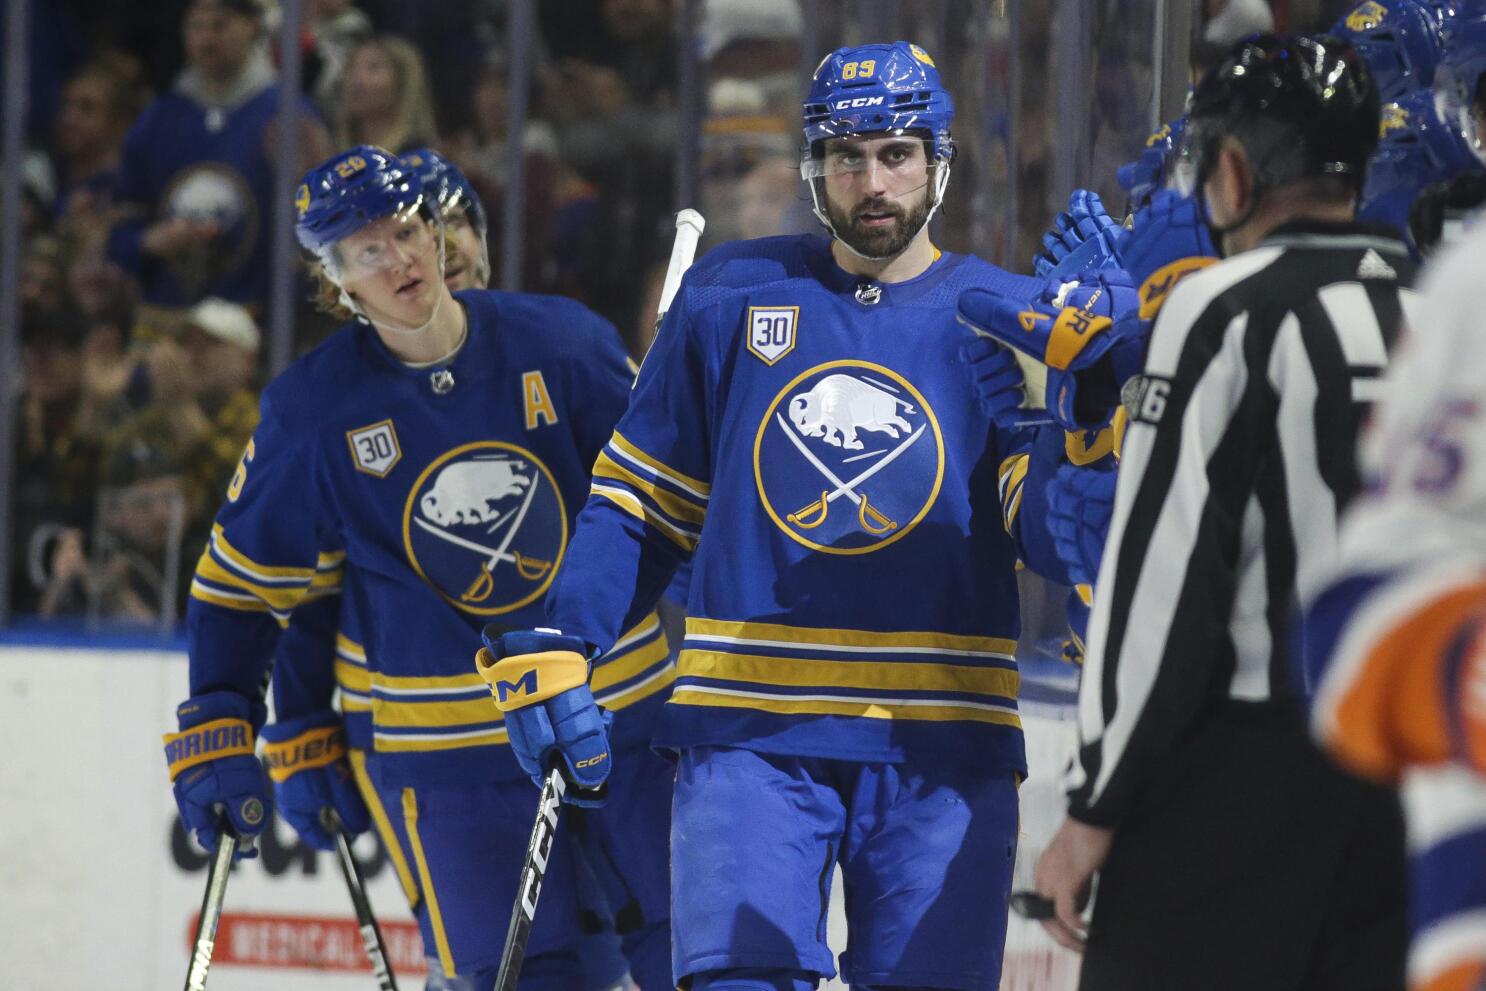 Twitter reacts to Buffalo Sabres' new royal blue jerseys